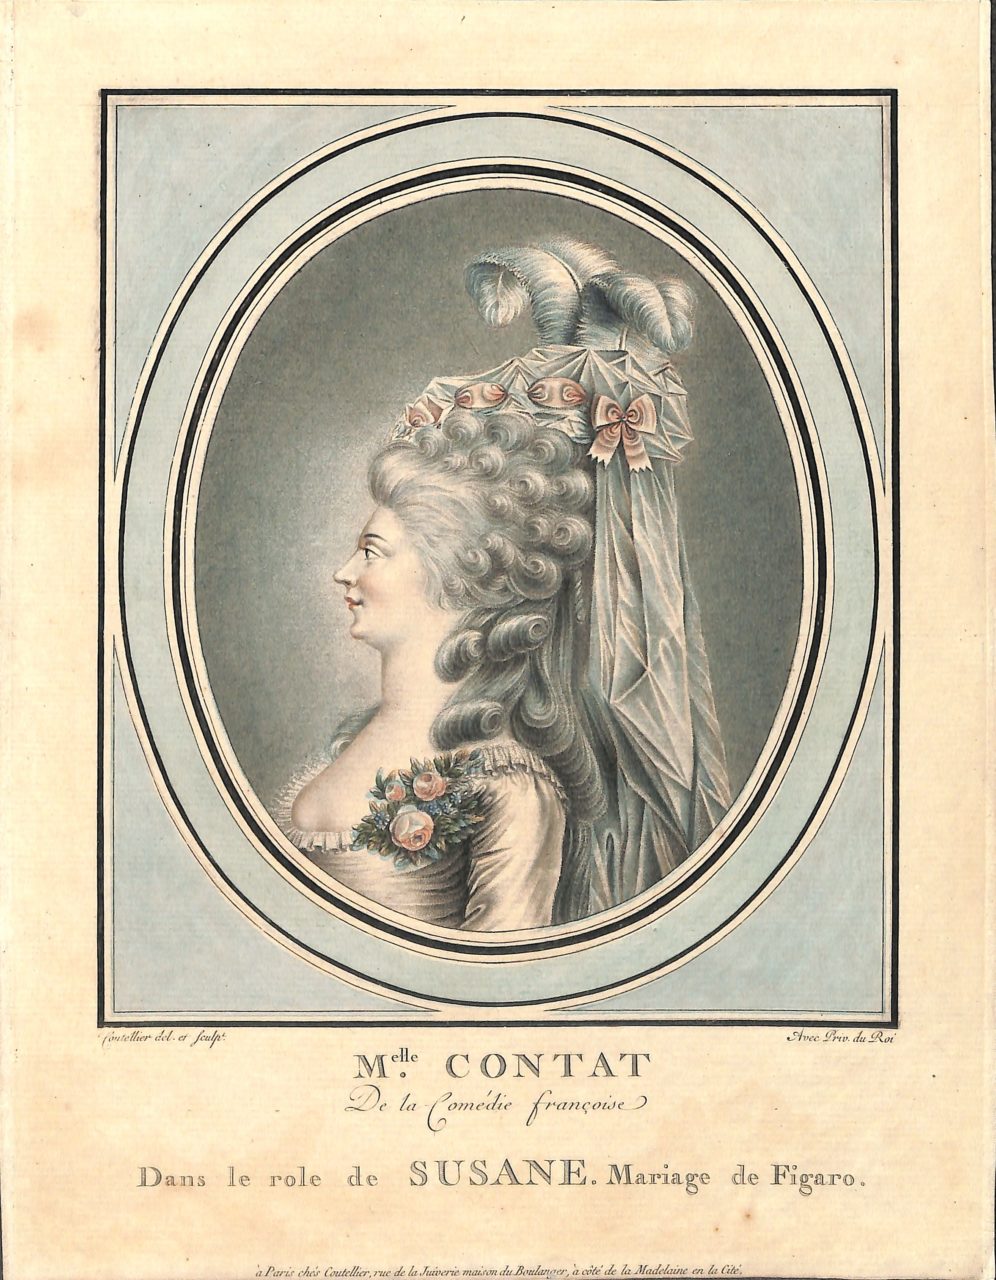 Louise Contat in the Role of Suzanne in Pierre Beaumarchais's "Le Mariage de Figaro" (The Marriage of Figaro)